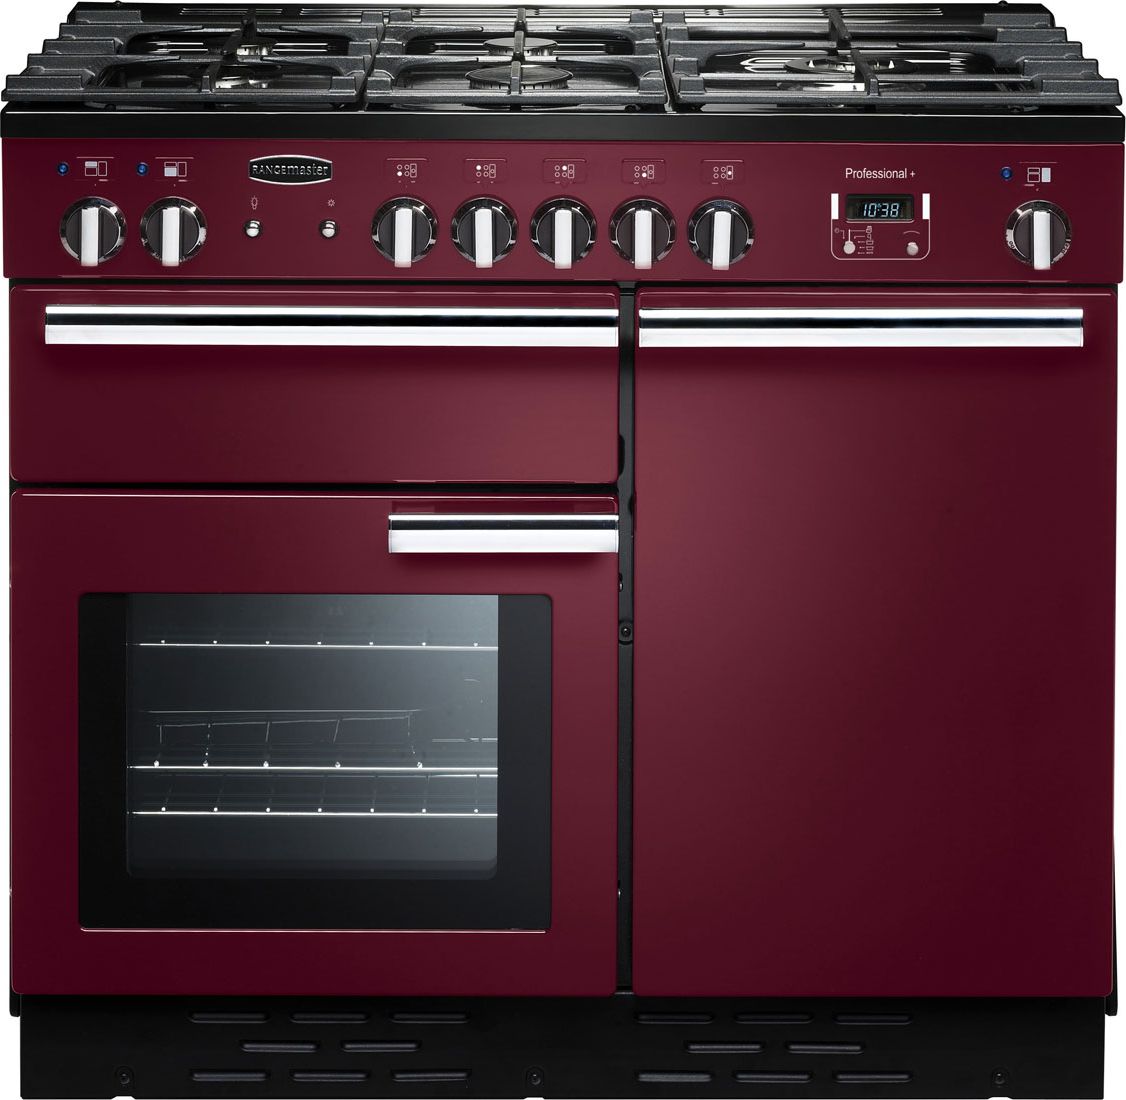 Rangemaster Professional Plus PROP100DFFCY/C 100cm Dual Fuel Range Cooker - Cranberry - A/A Rated, Red